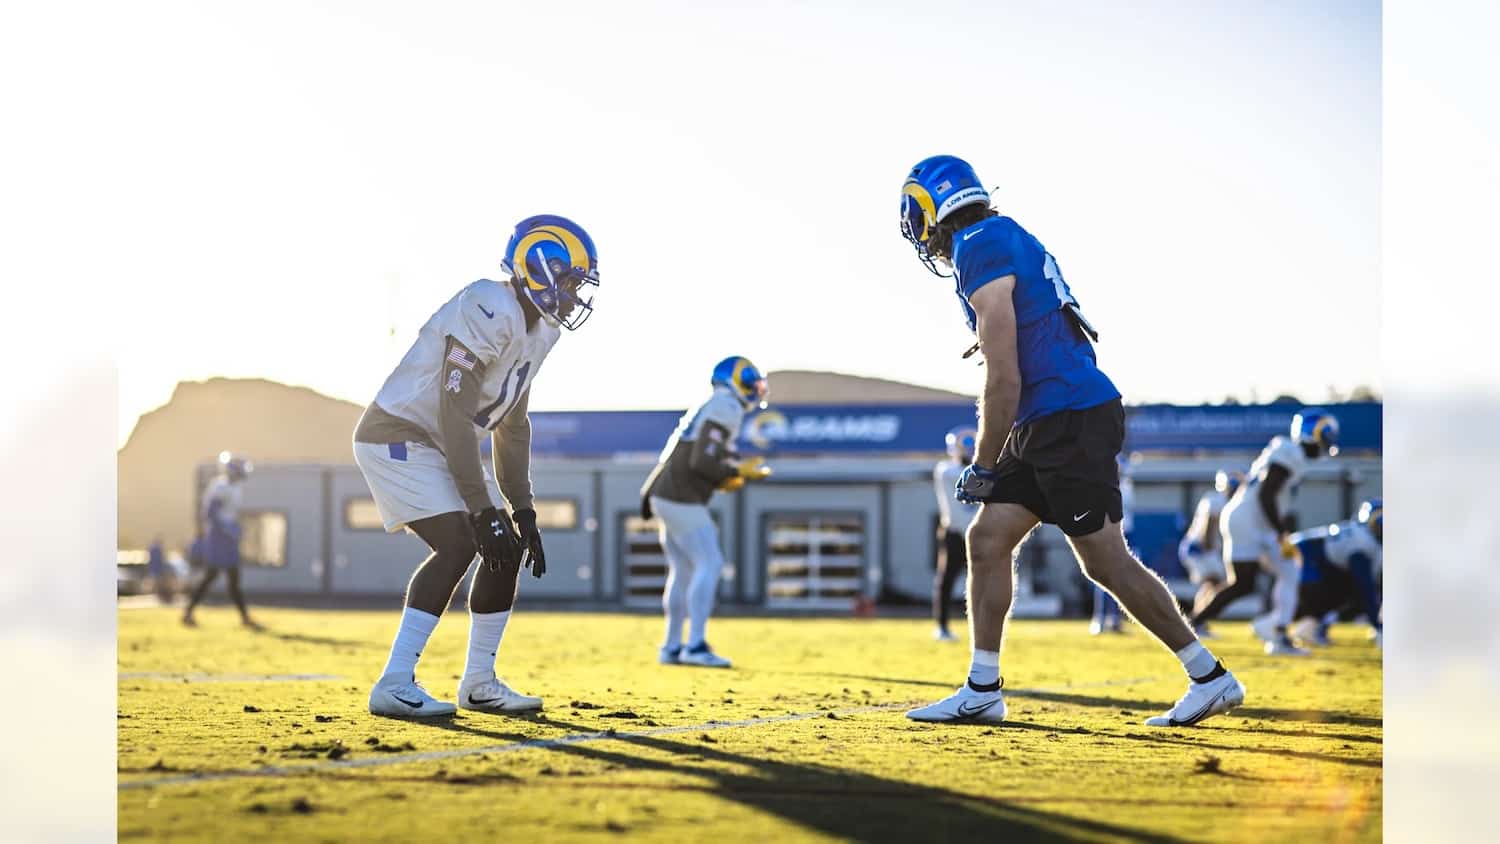 Los Angeles Rams Practice Leading Up To Playing The Green Bay Packers. Photo Credit: Brevin Townsell | LA Rams